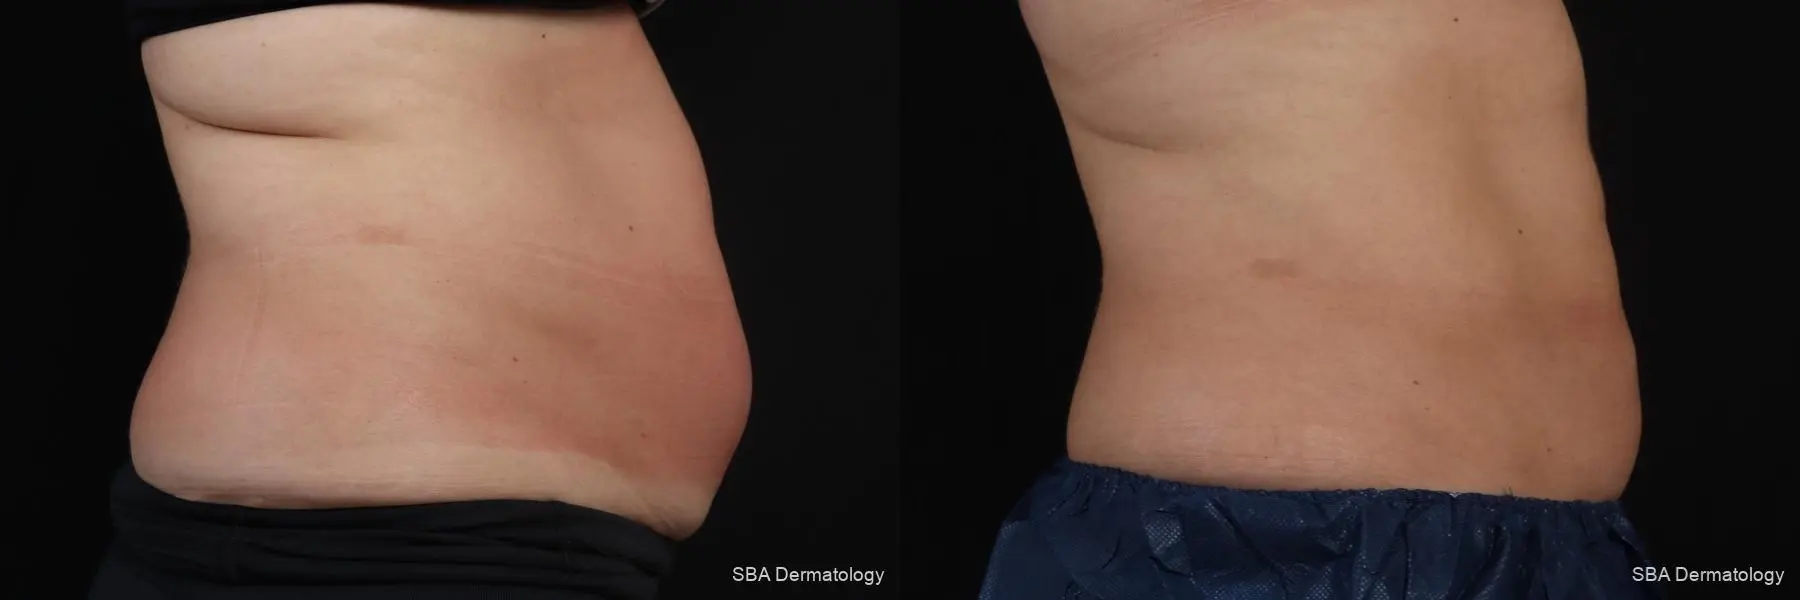 Coolsculpting: Patient 6 - Before and After 7